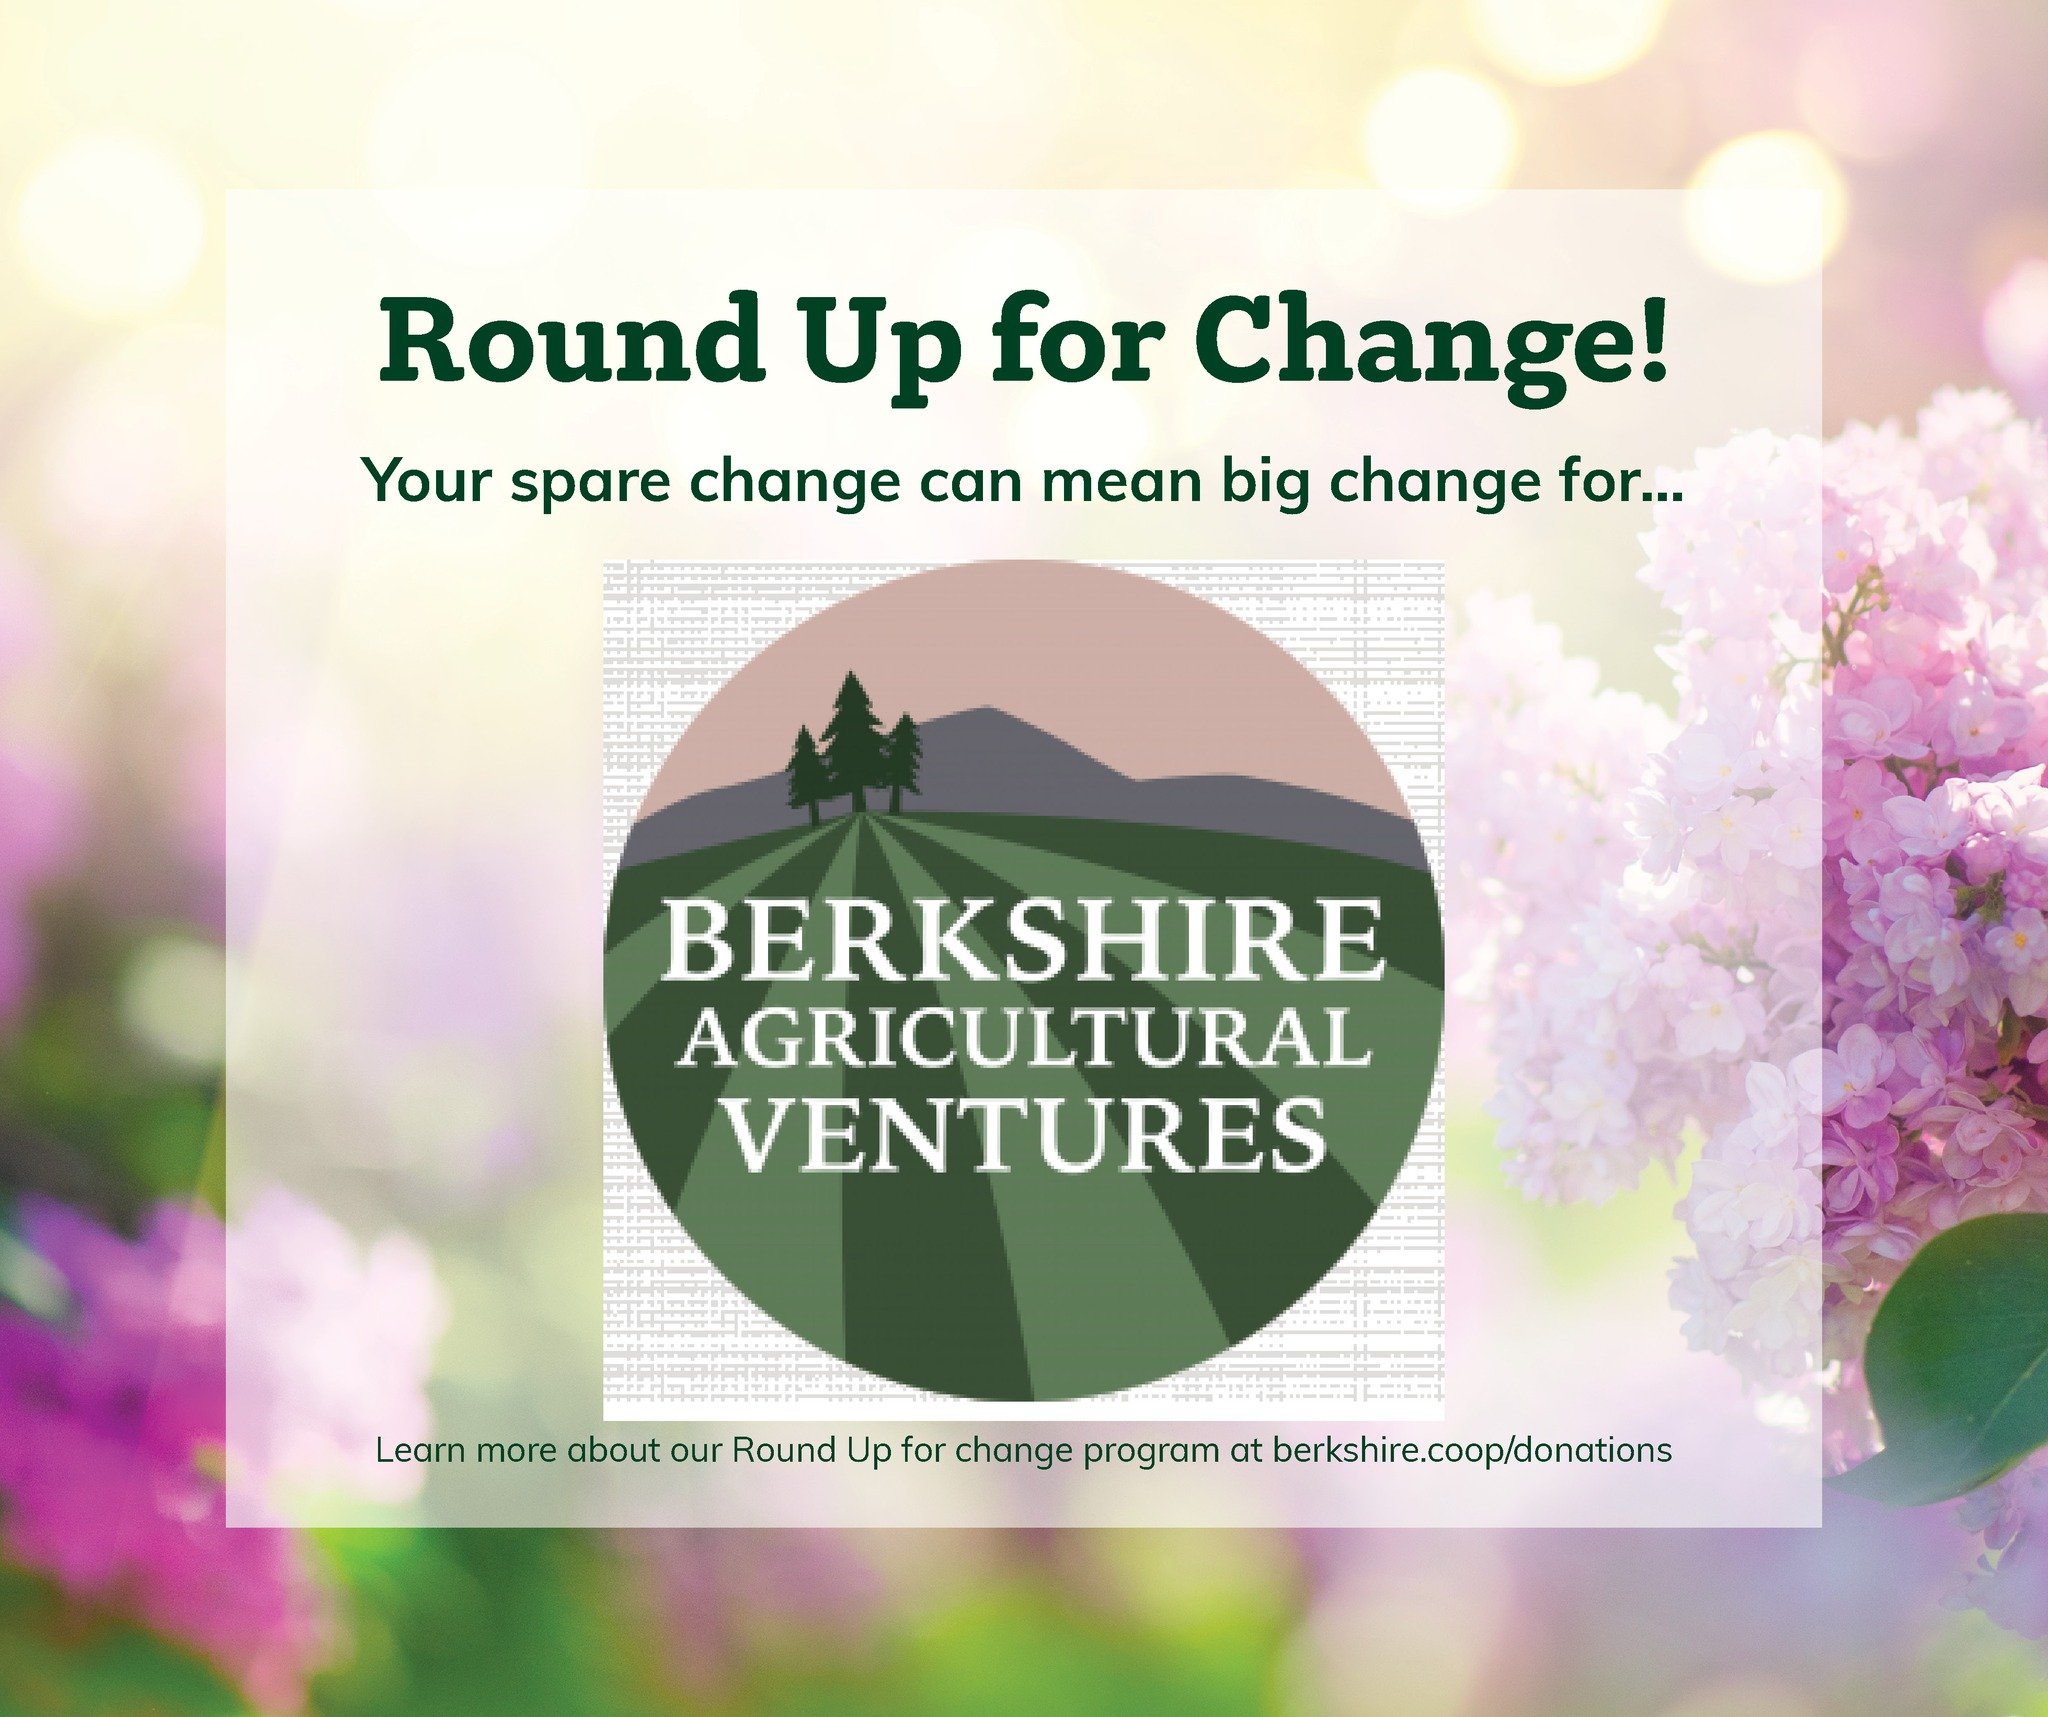 Donate your spare change to @berkshireagventures this month! They support the development and viability of local farms and food businesses in order to build a thriving and equitable local food economy. They offer technical and business assistance and